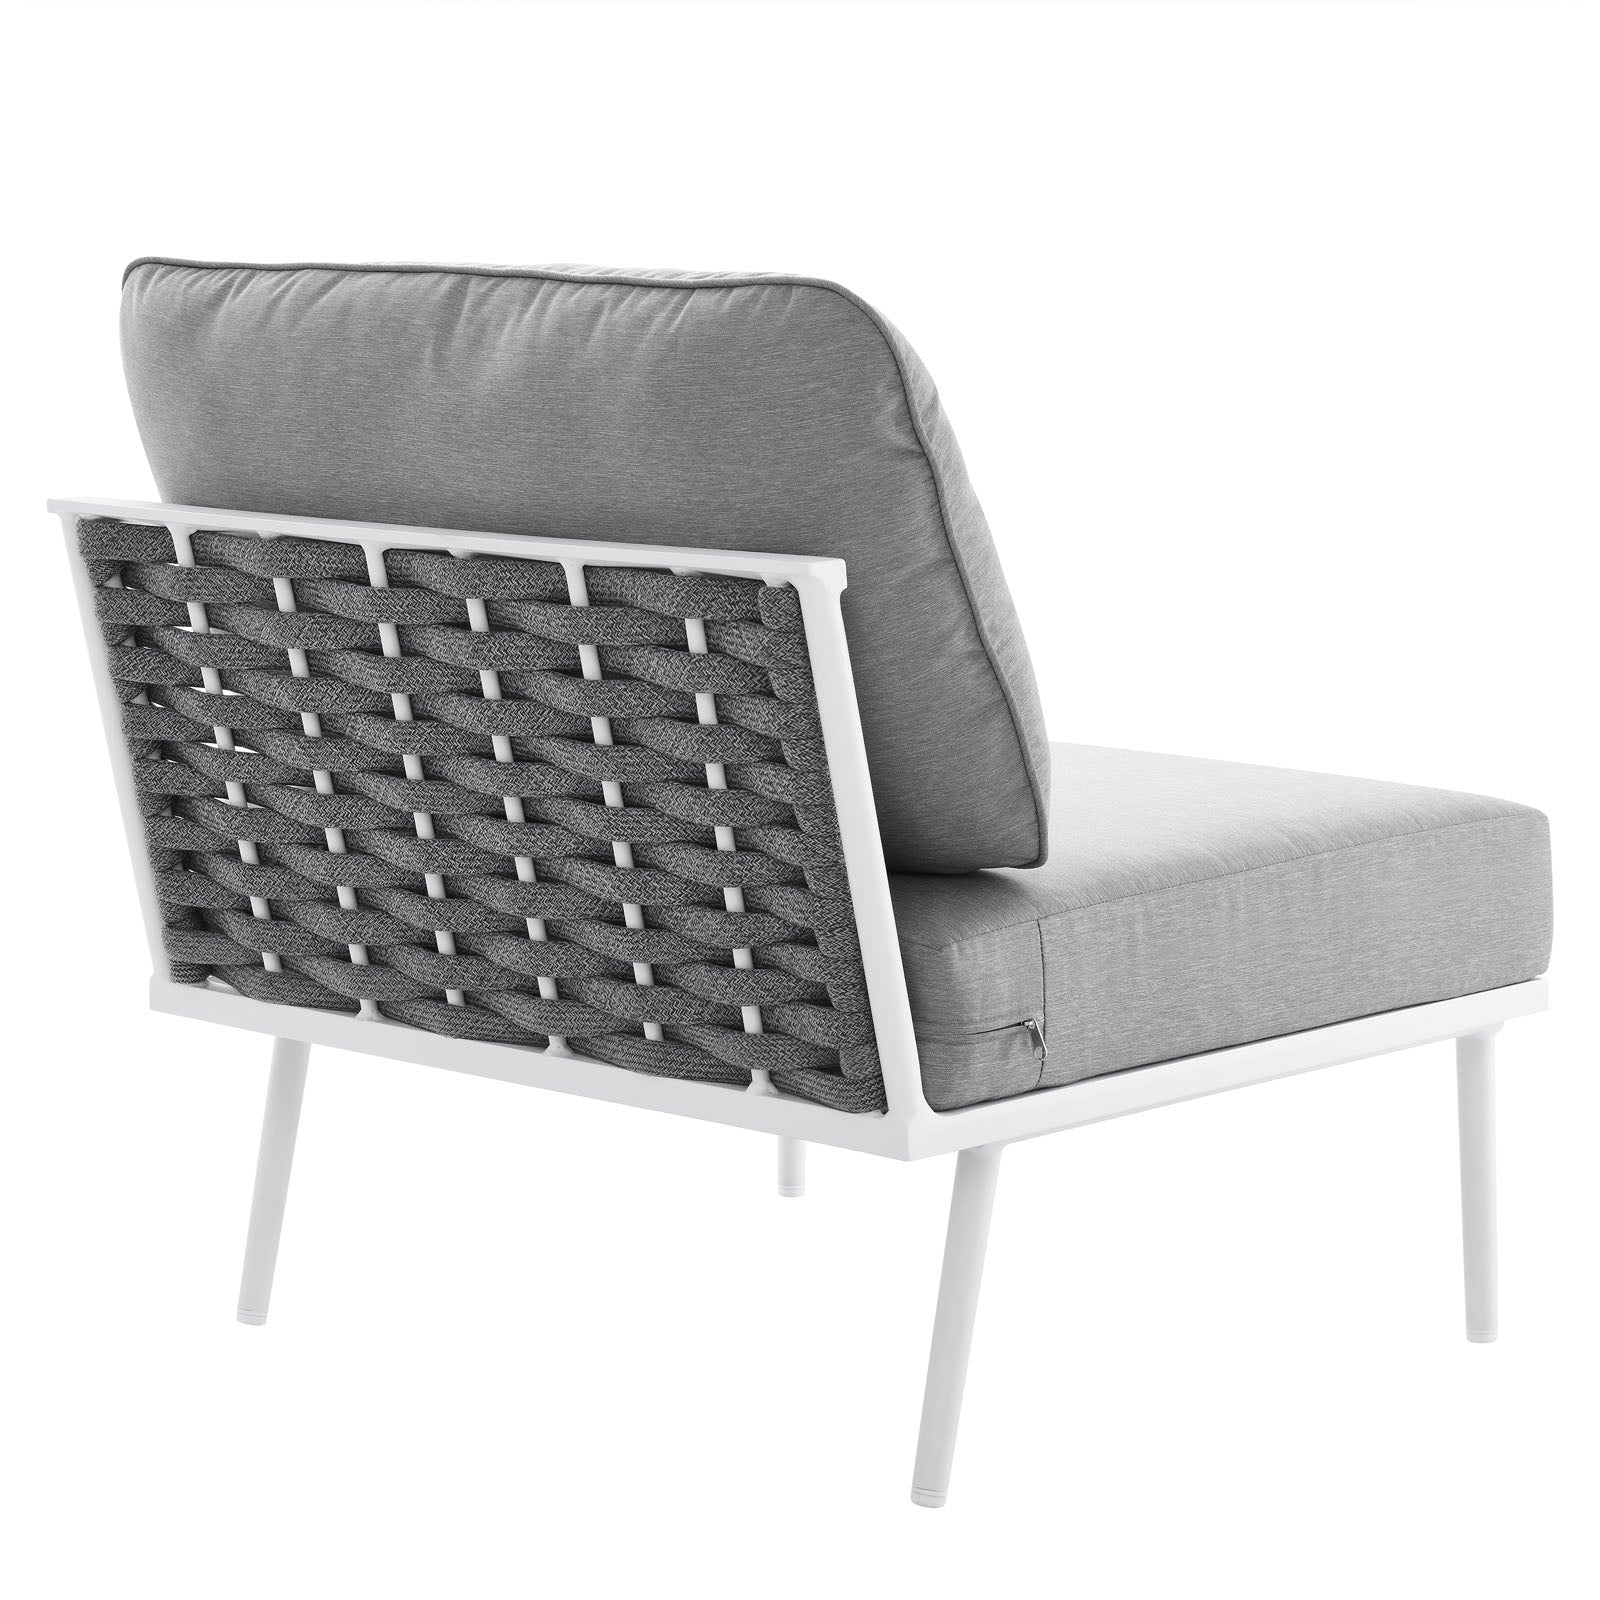 Stance Outdoor Patio Aluminum Armless Chair - East Shore Modern Home Furnishings